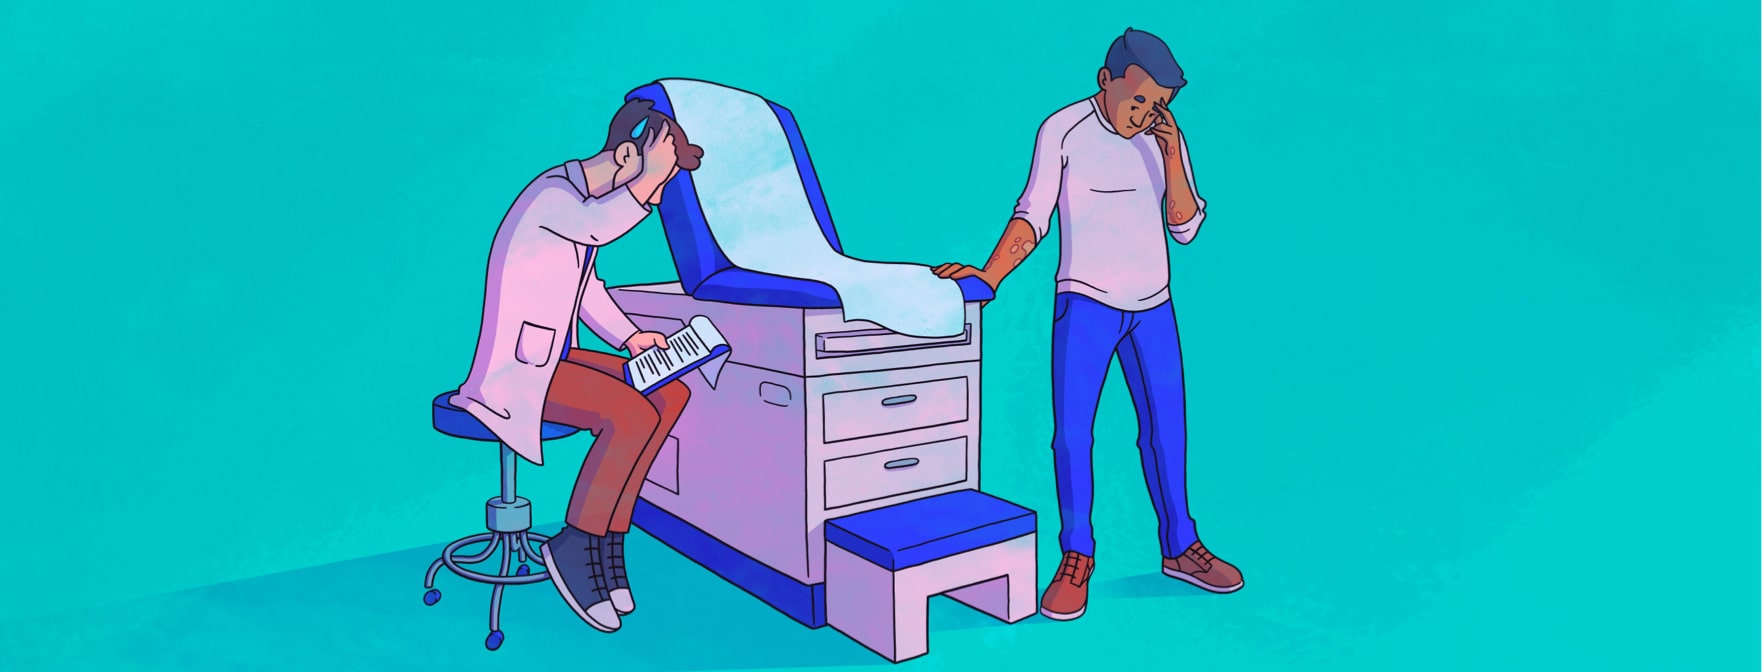 A man with psoriasis apprehensively looking at an examination table and doctor who sits scratching his head in confusion